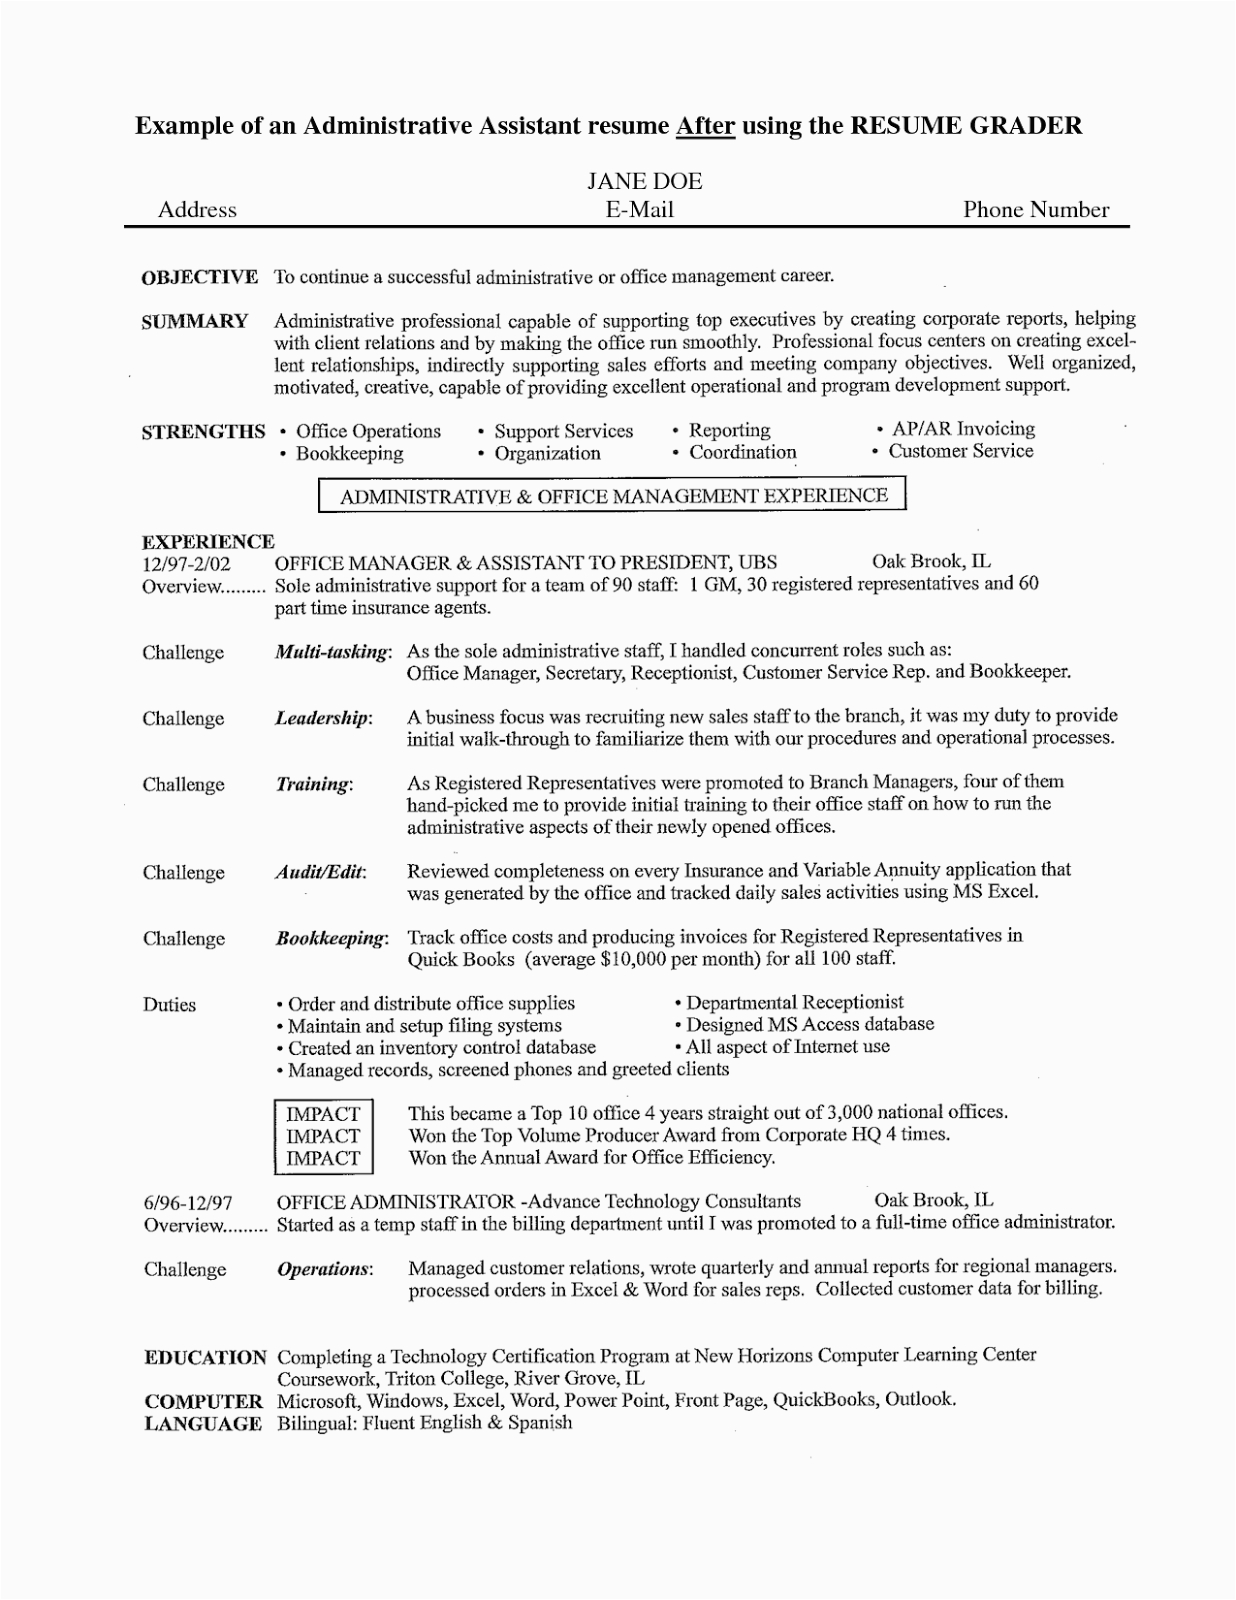 Sample Objective On Resume for Administrative assistant Sample Objective Resume for Administrative assistant